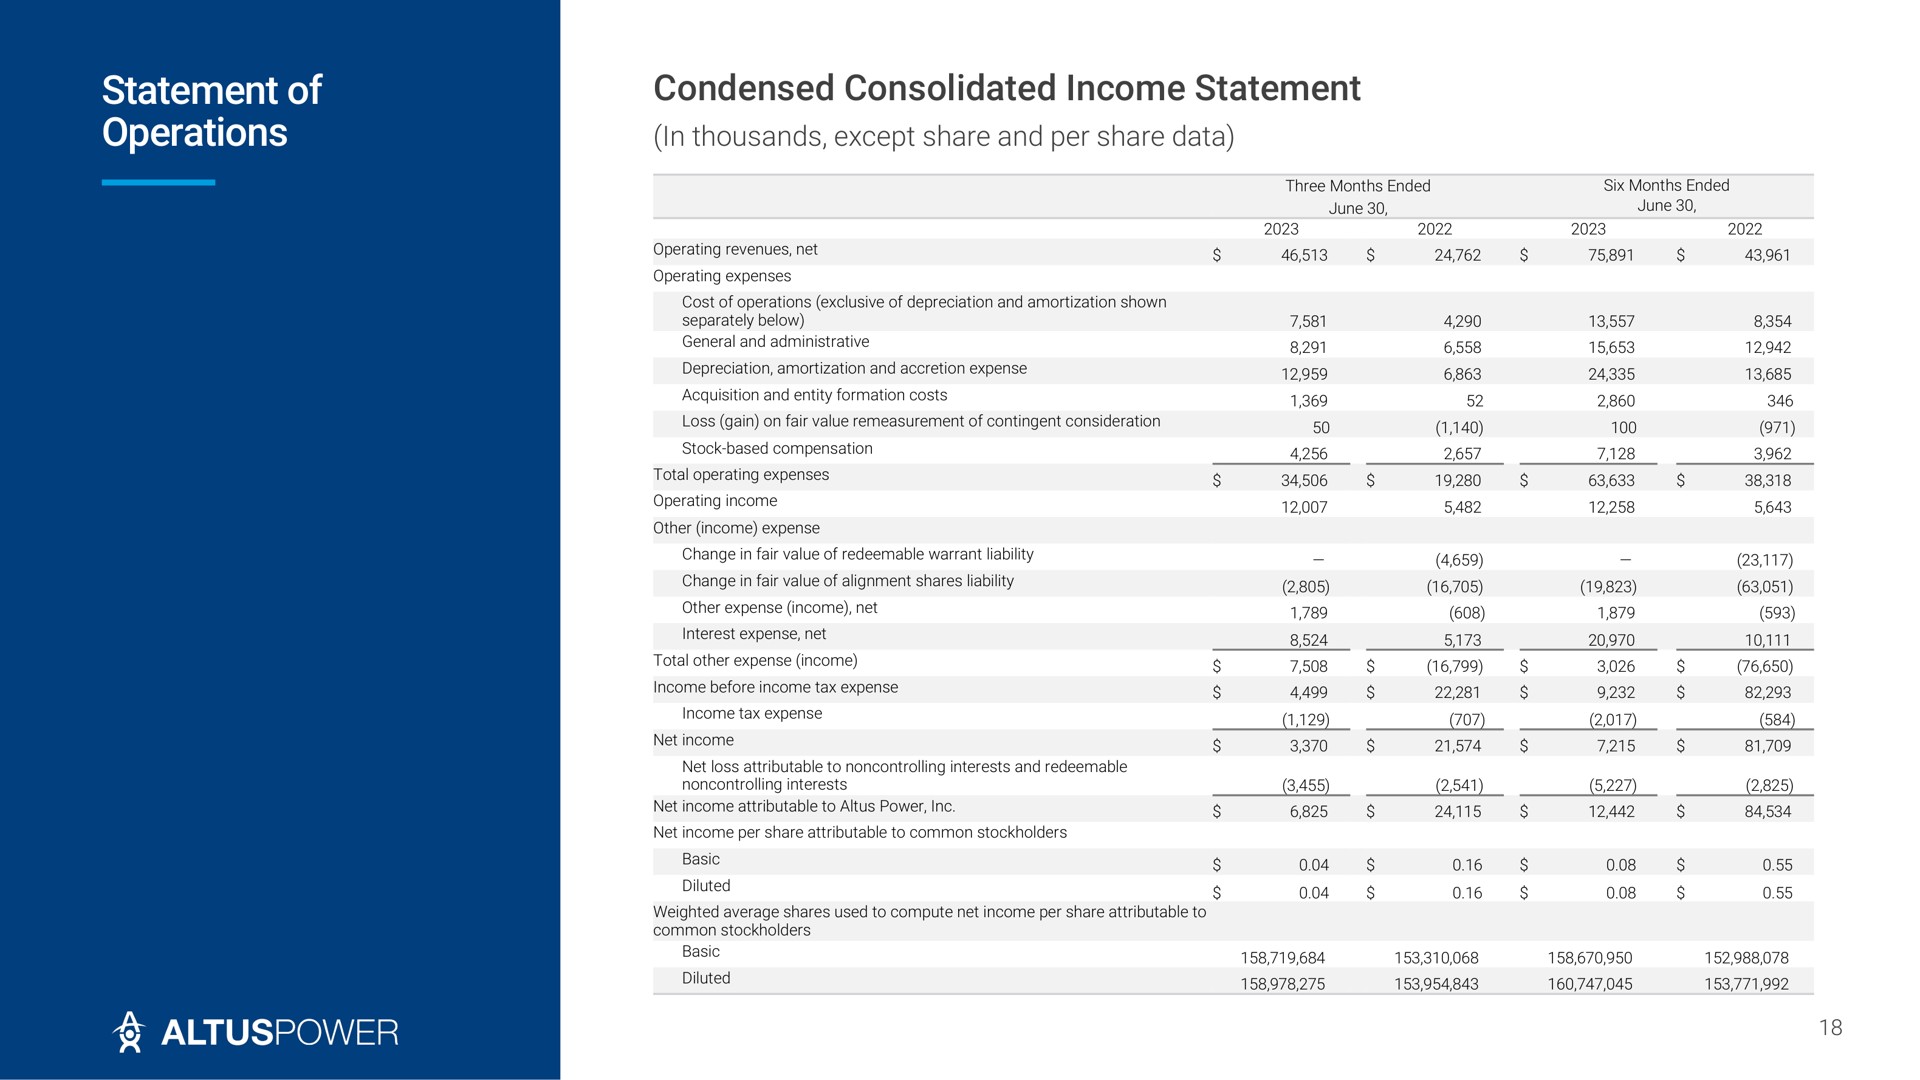 statement of operations condensed consolidated income statement | Altus Power